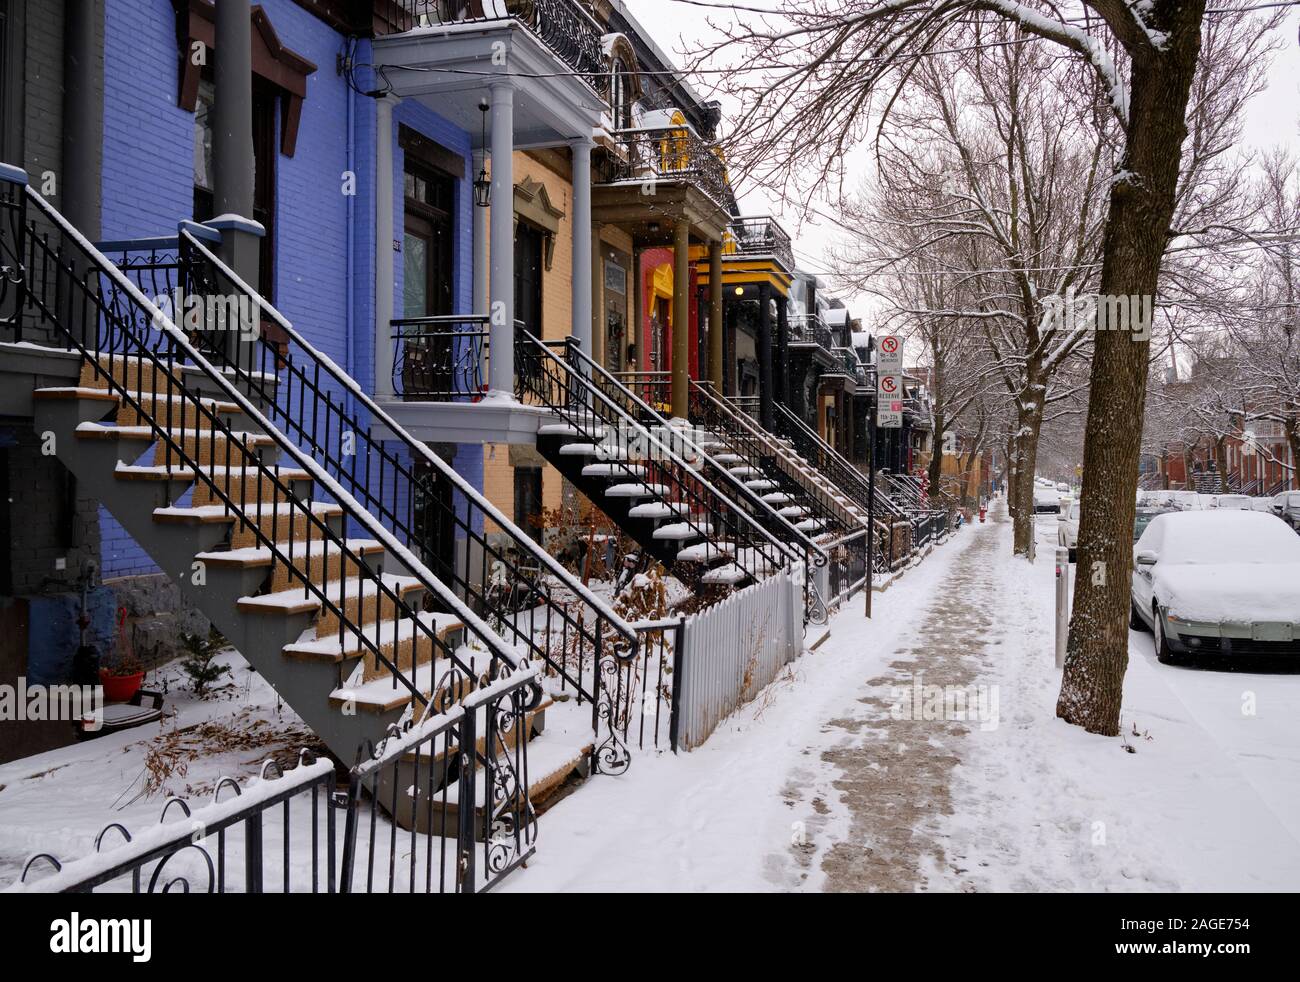 Winter Montreal scene, on Plateau with colorful houses and snow covered outdoor stairs and sidewalk Montreal, Canada Stock Photo